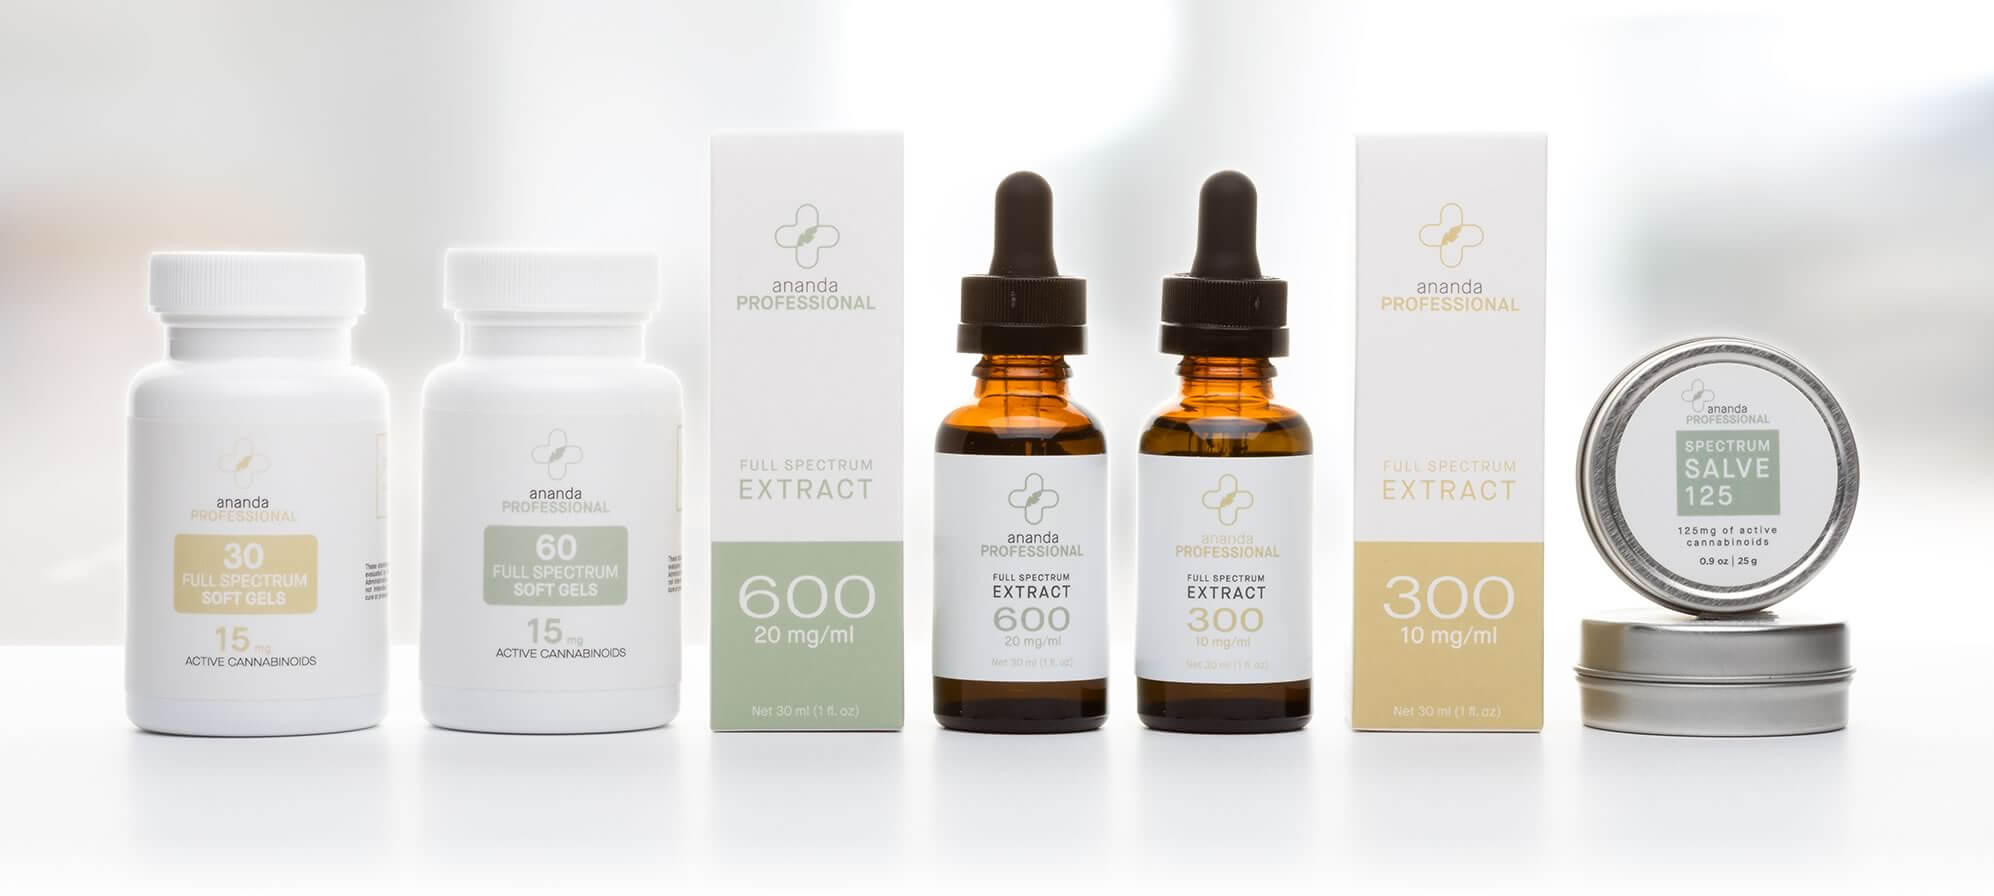 cbd products, image of our Thomas Seashore Drugs CBD products.